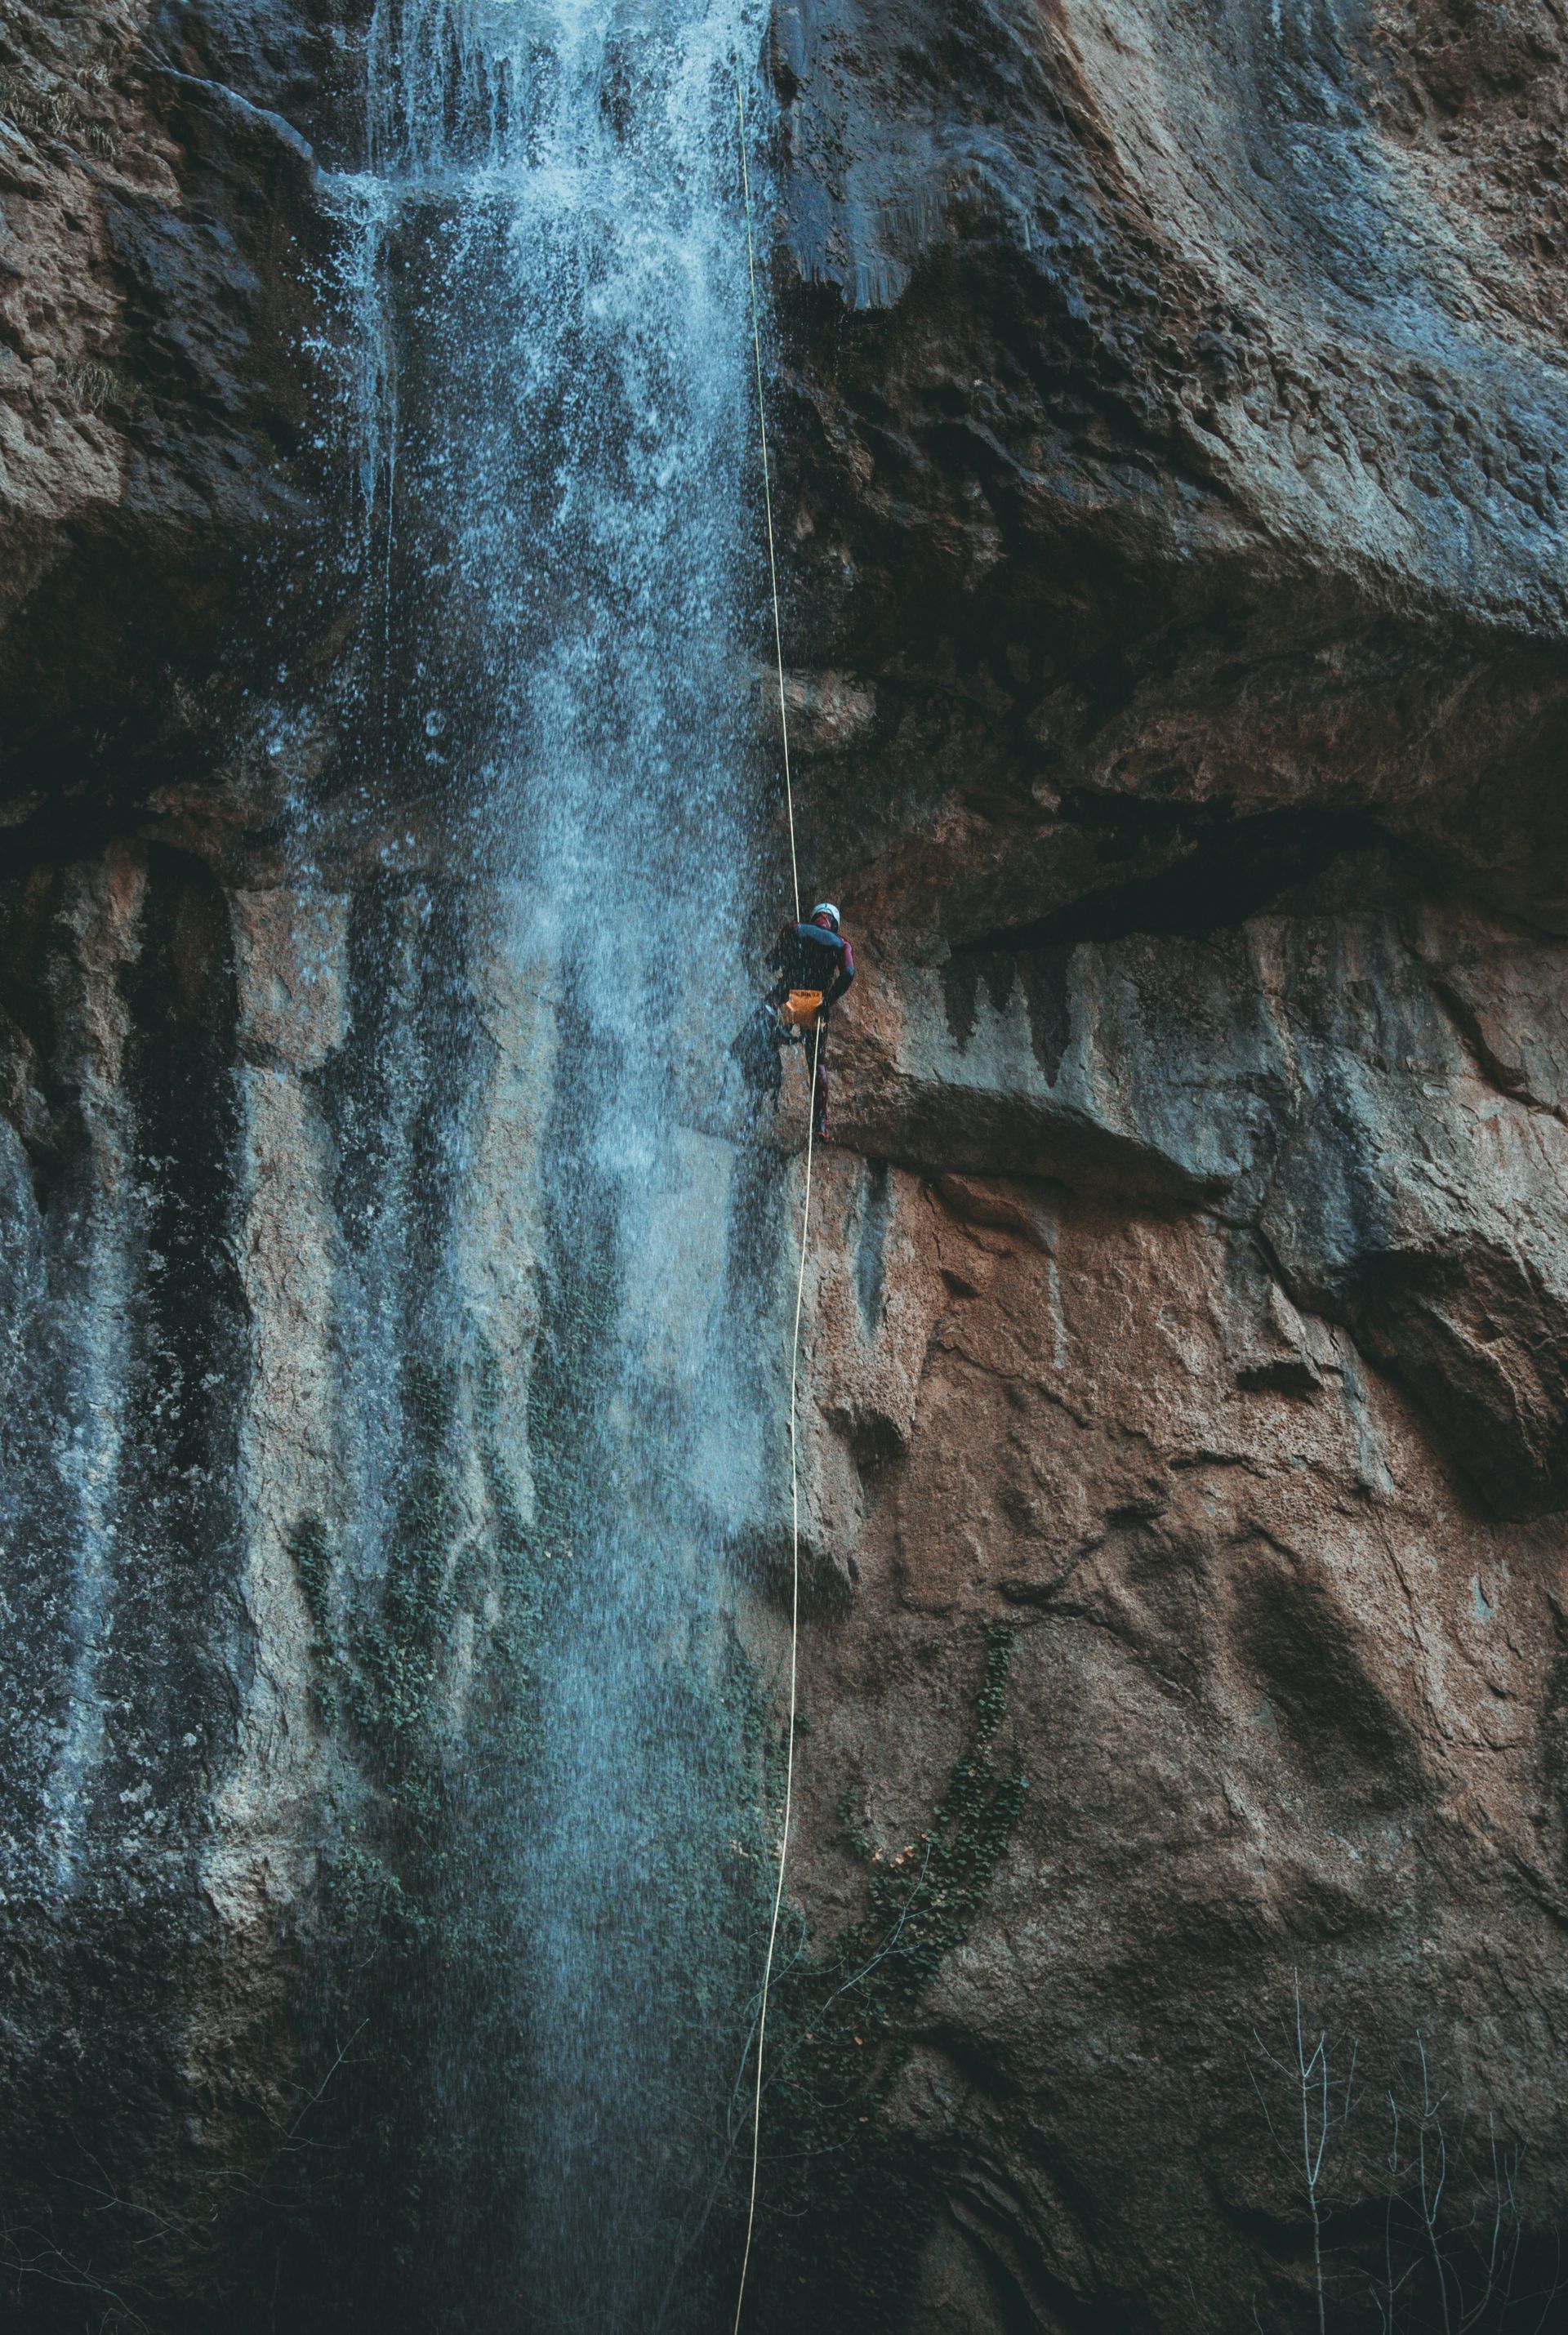 A man abseiling on a rock face.